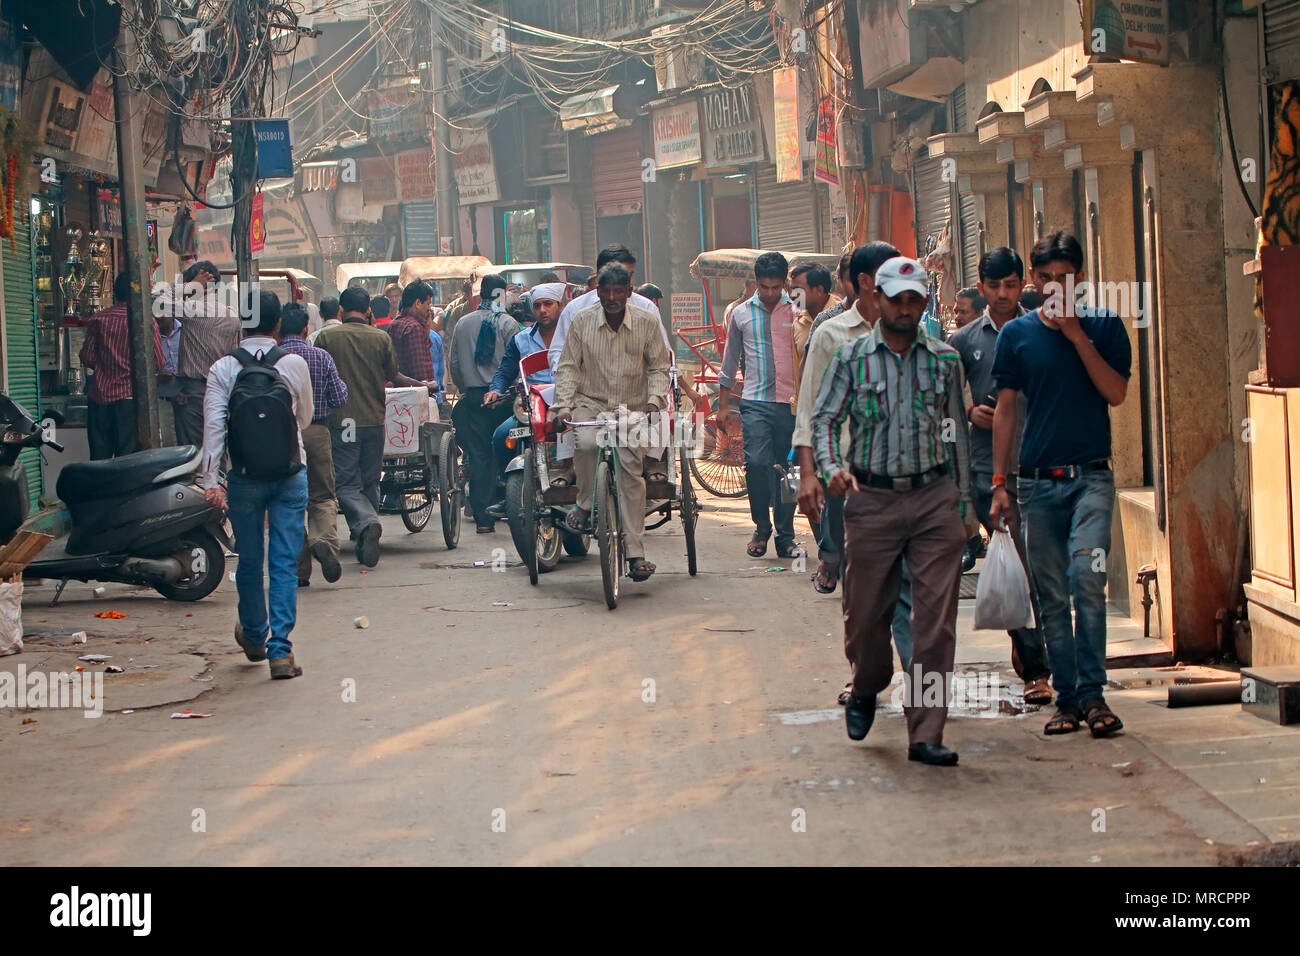 Delhi, India - November 20, 2015: Crowded street with shops in Old Delhi crammed with people busy with their daily activities Stock Photo